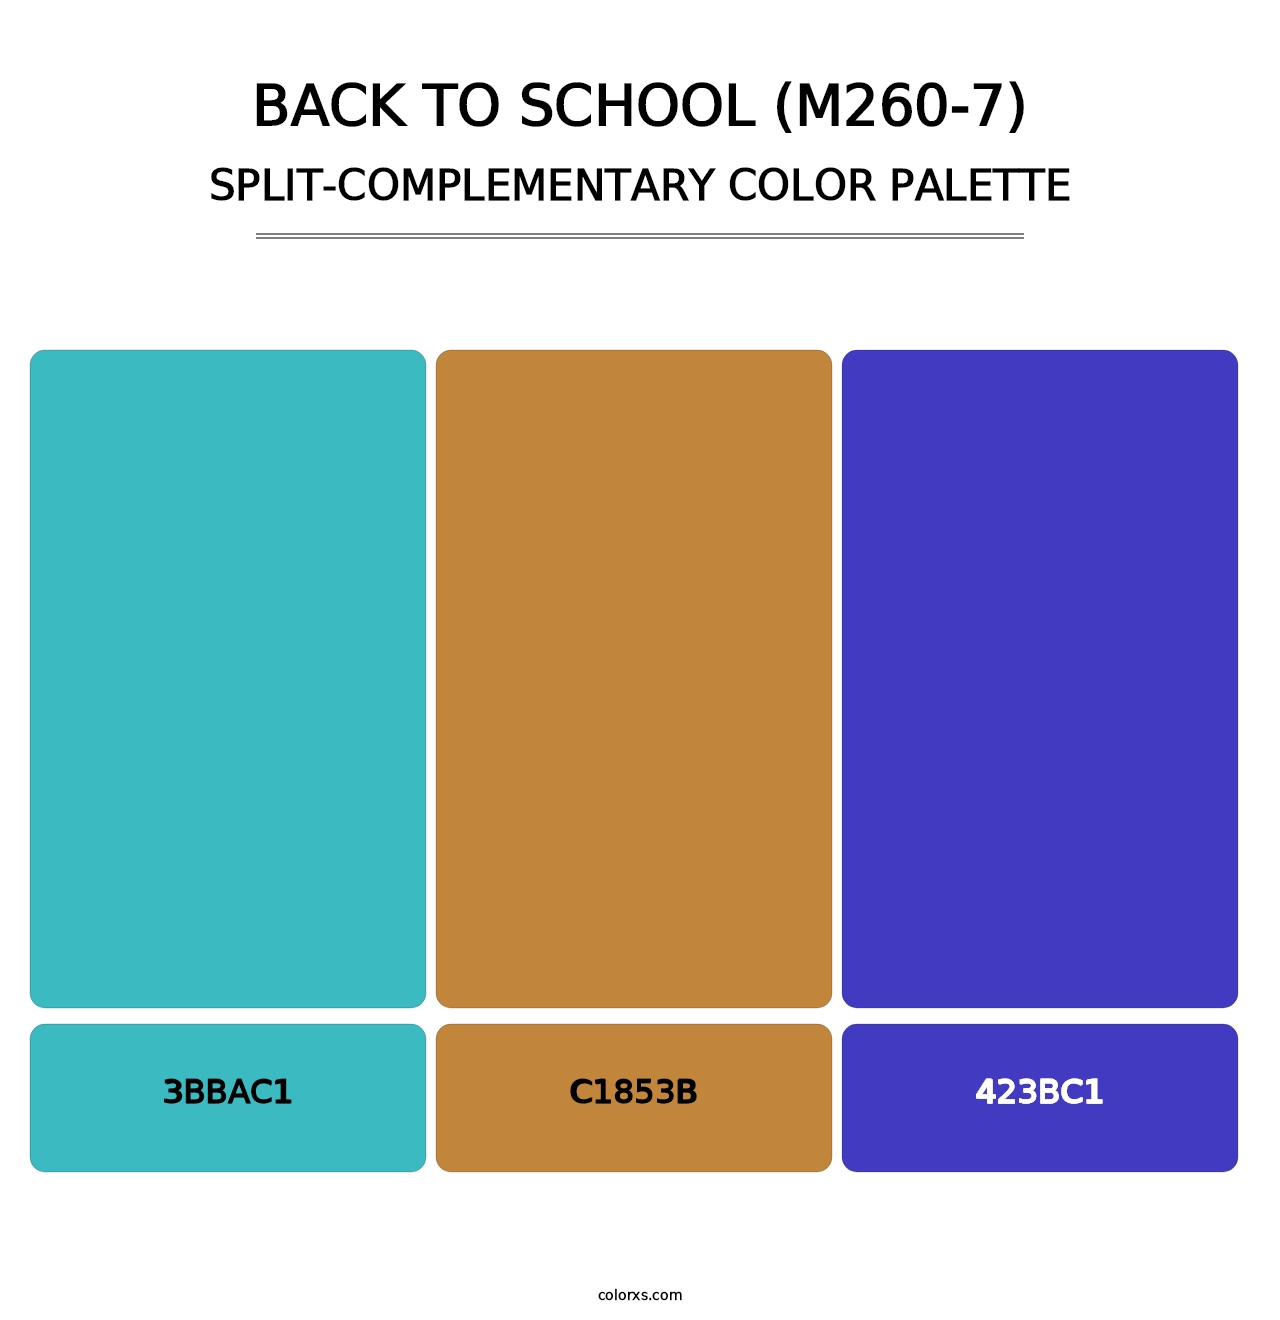 Back To School (M260-7) - Split-Complementary Color Palette